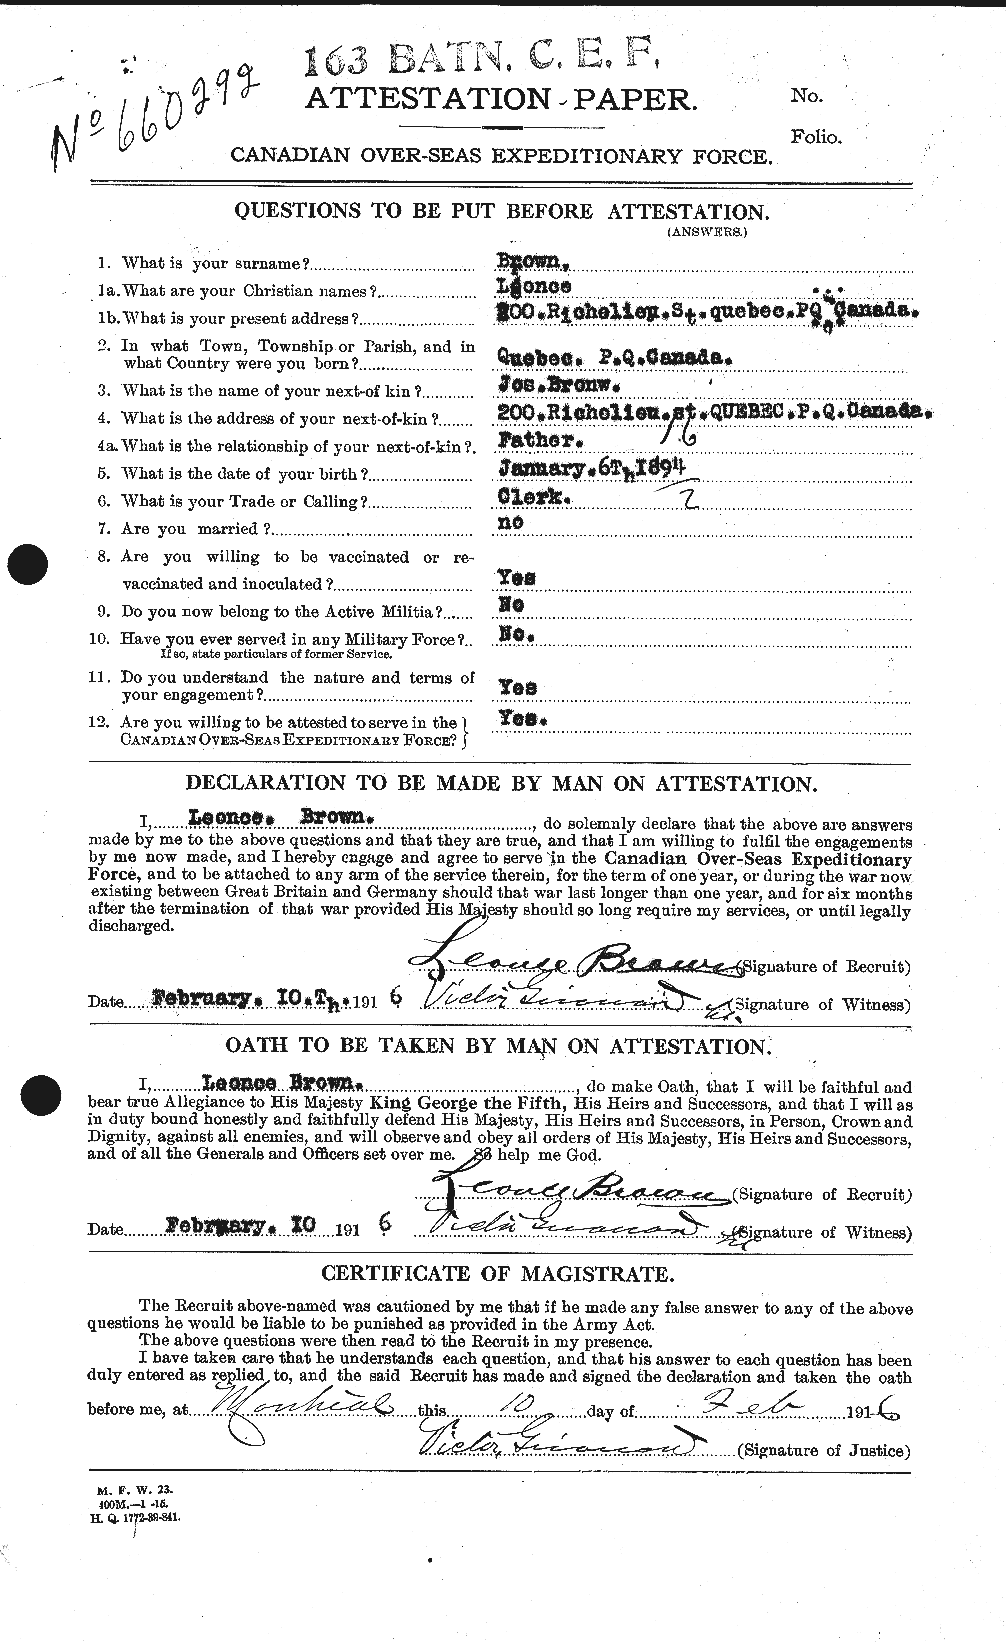 Personnel Records of the First World War - CEF 266300a